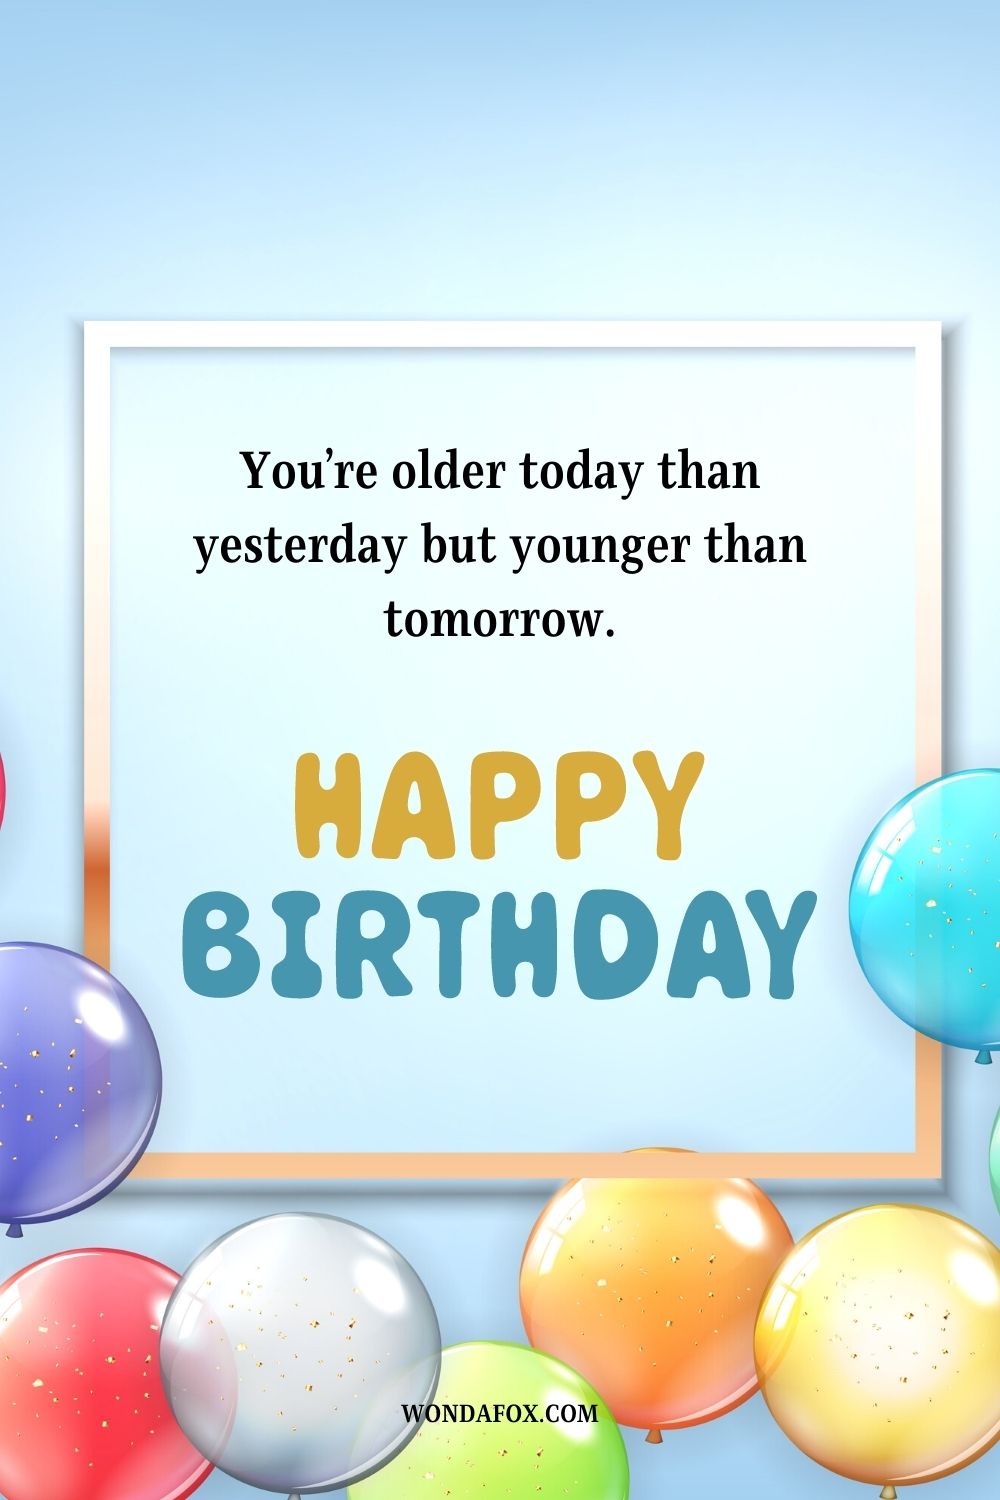 “You’re older today than yesterday but younger than tomorrow, happy birthday!”